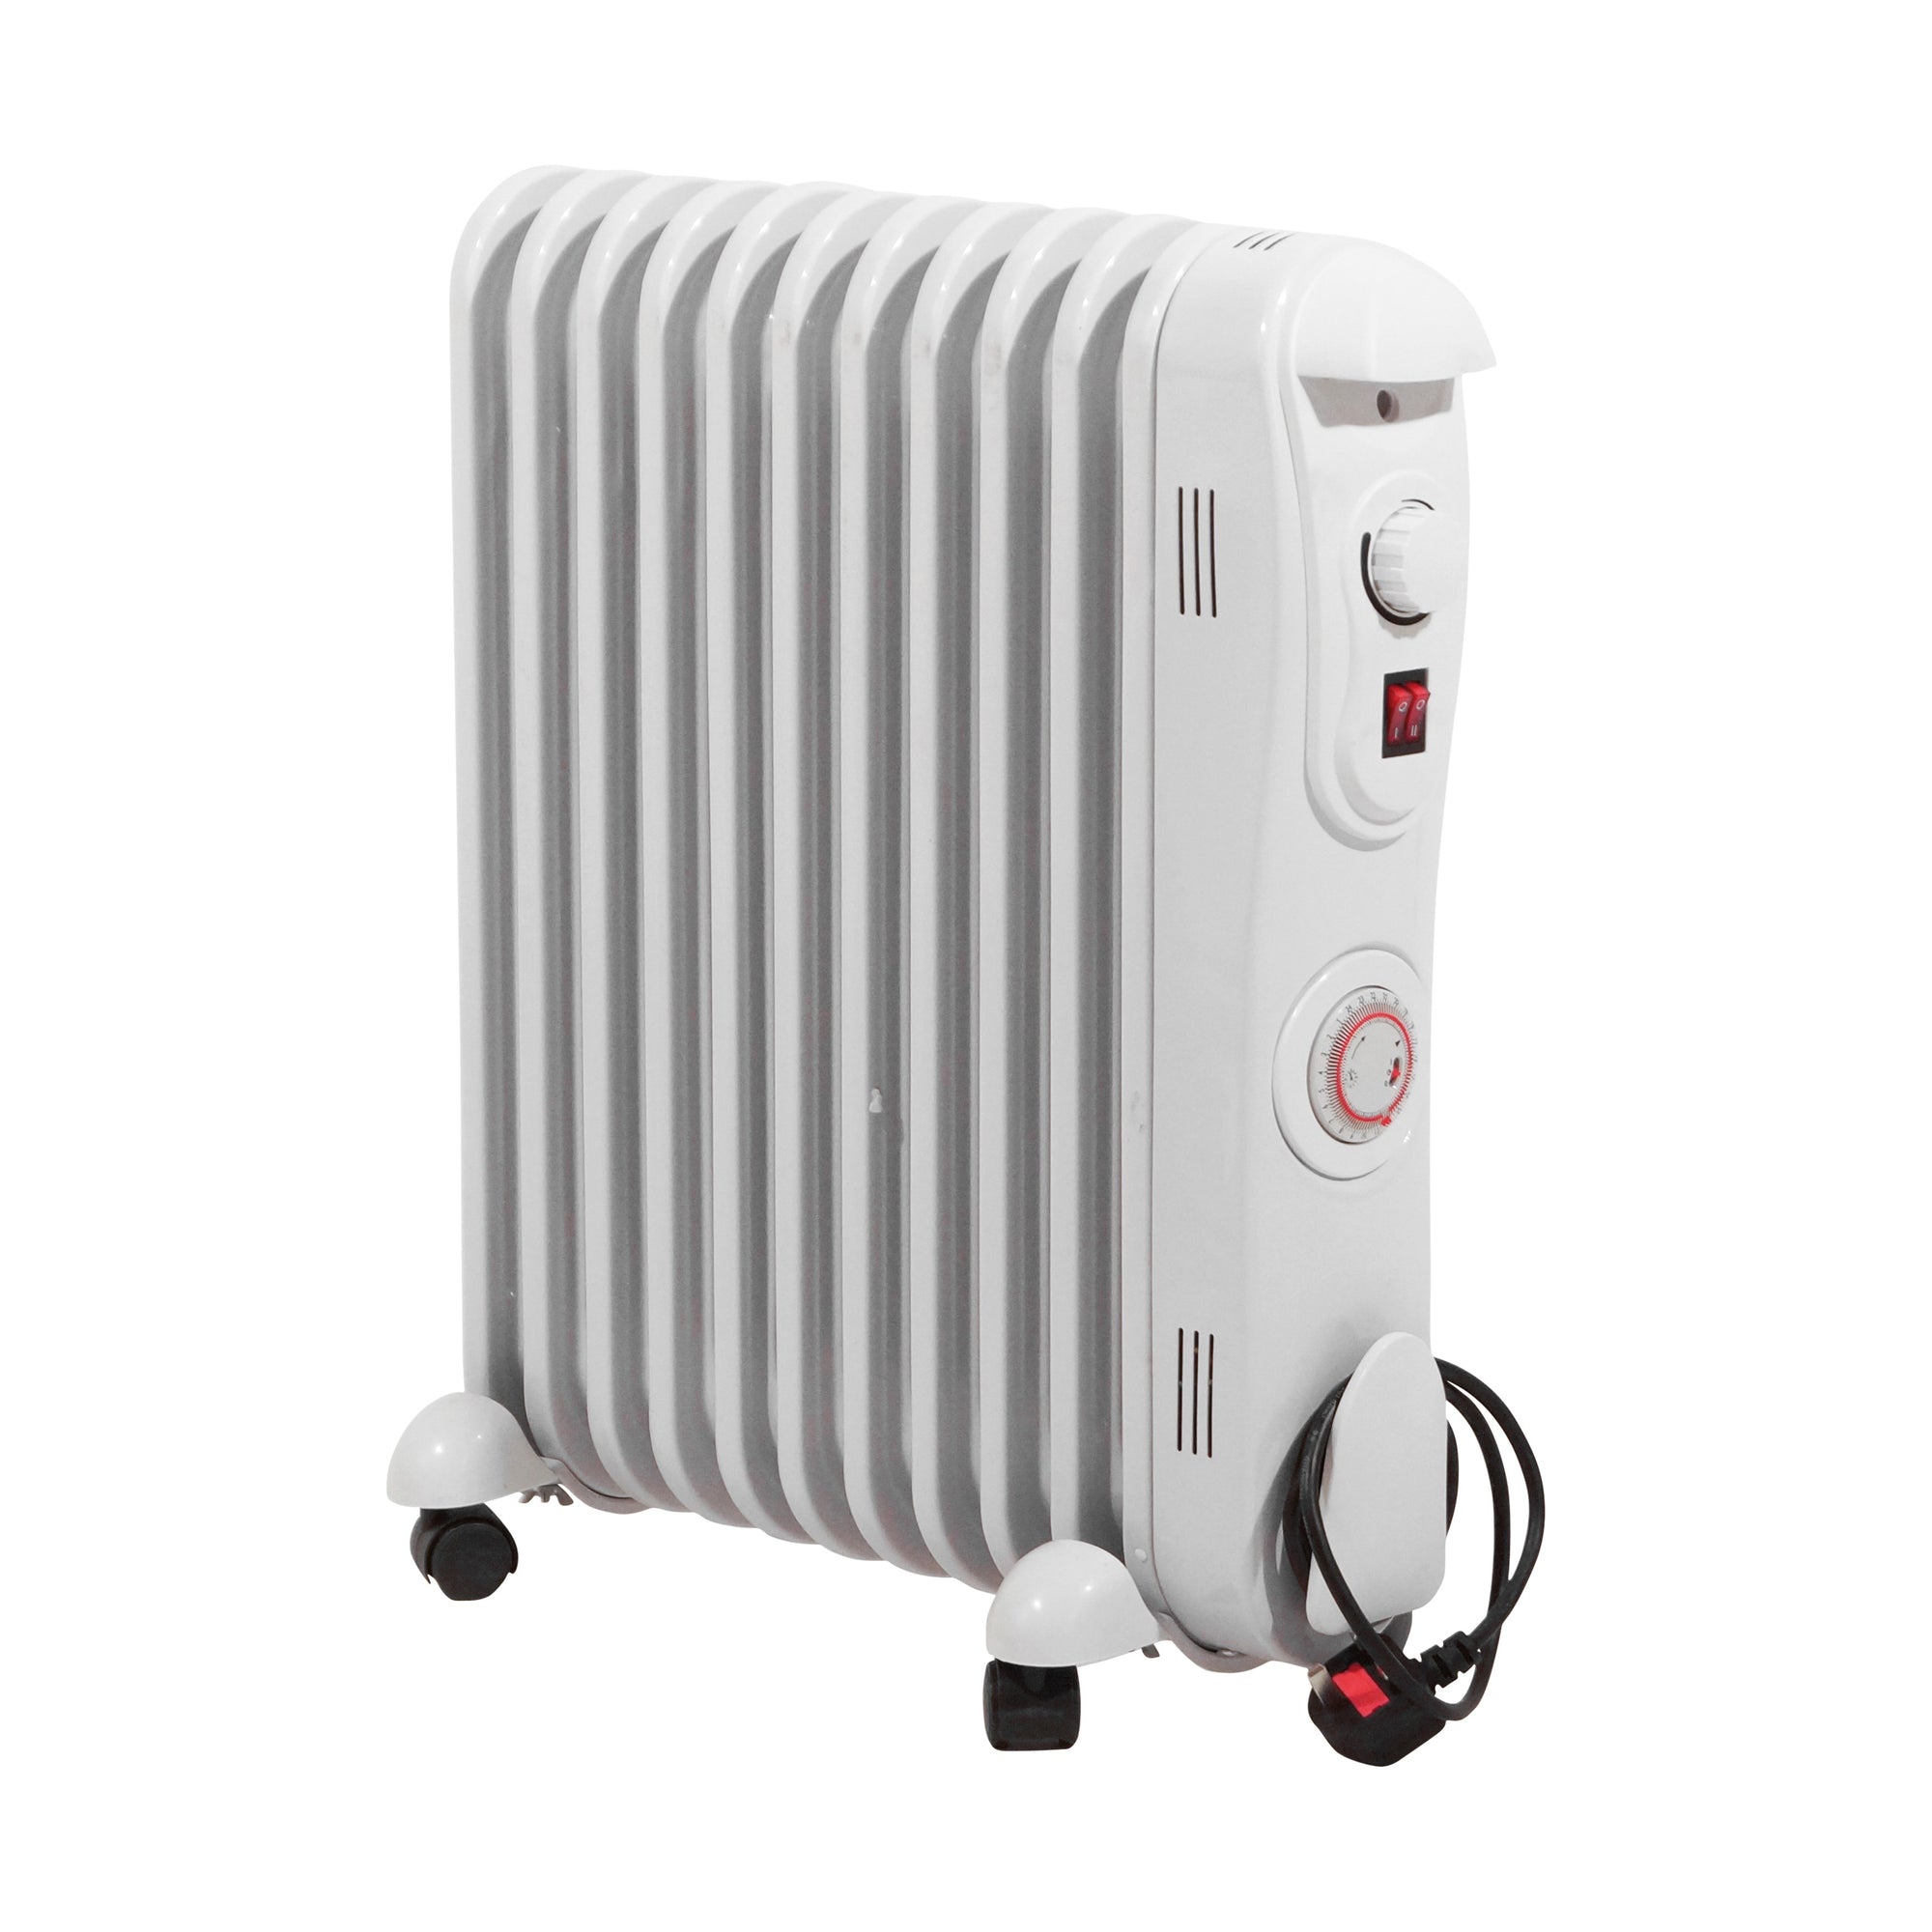 Image of a Premiair 2.5kW 11 Fin Oil-Filled Radiator on a white background